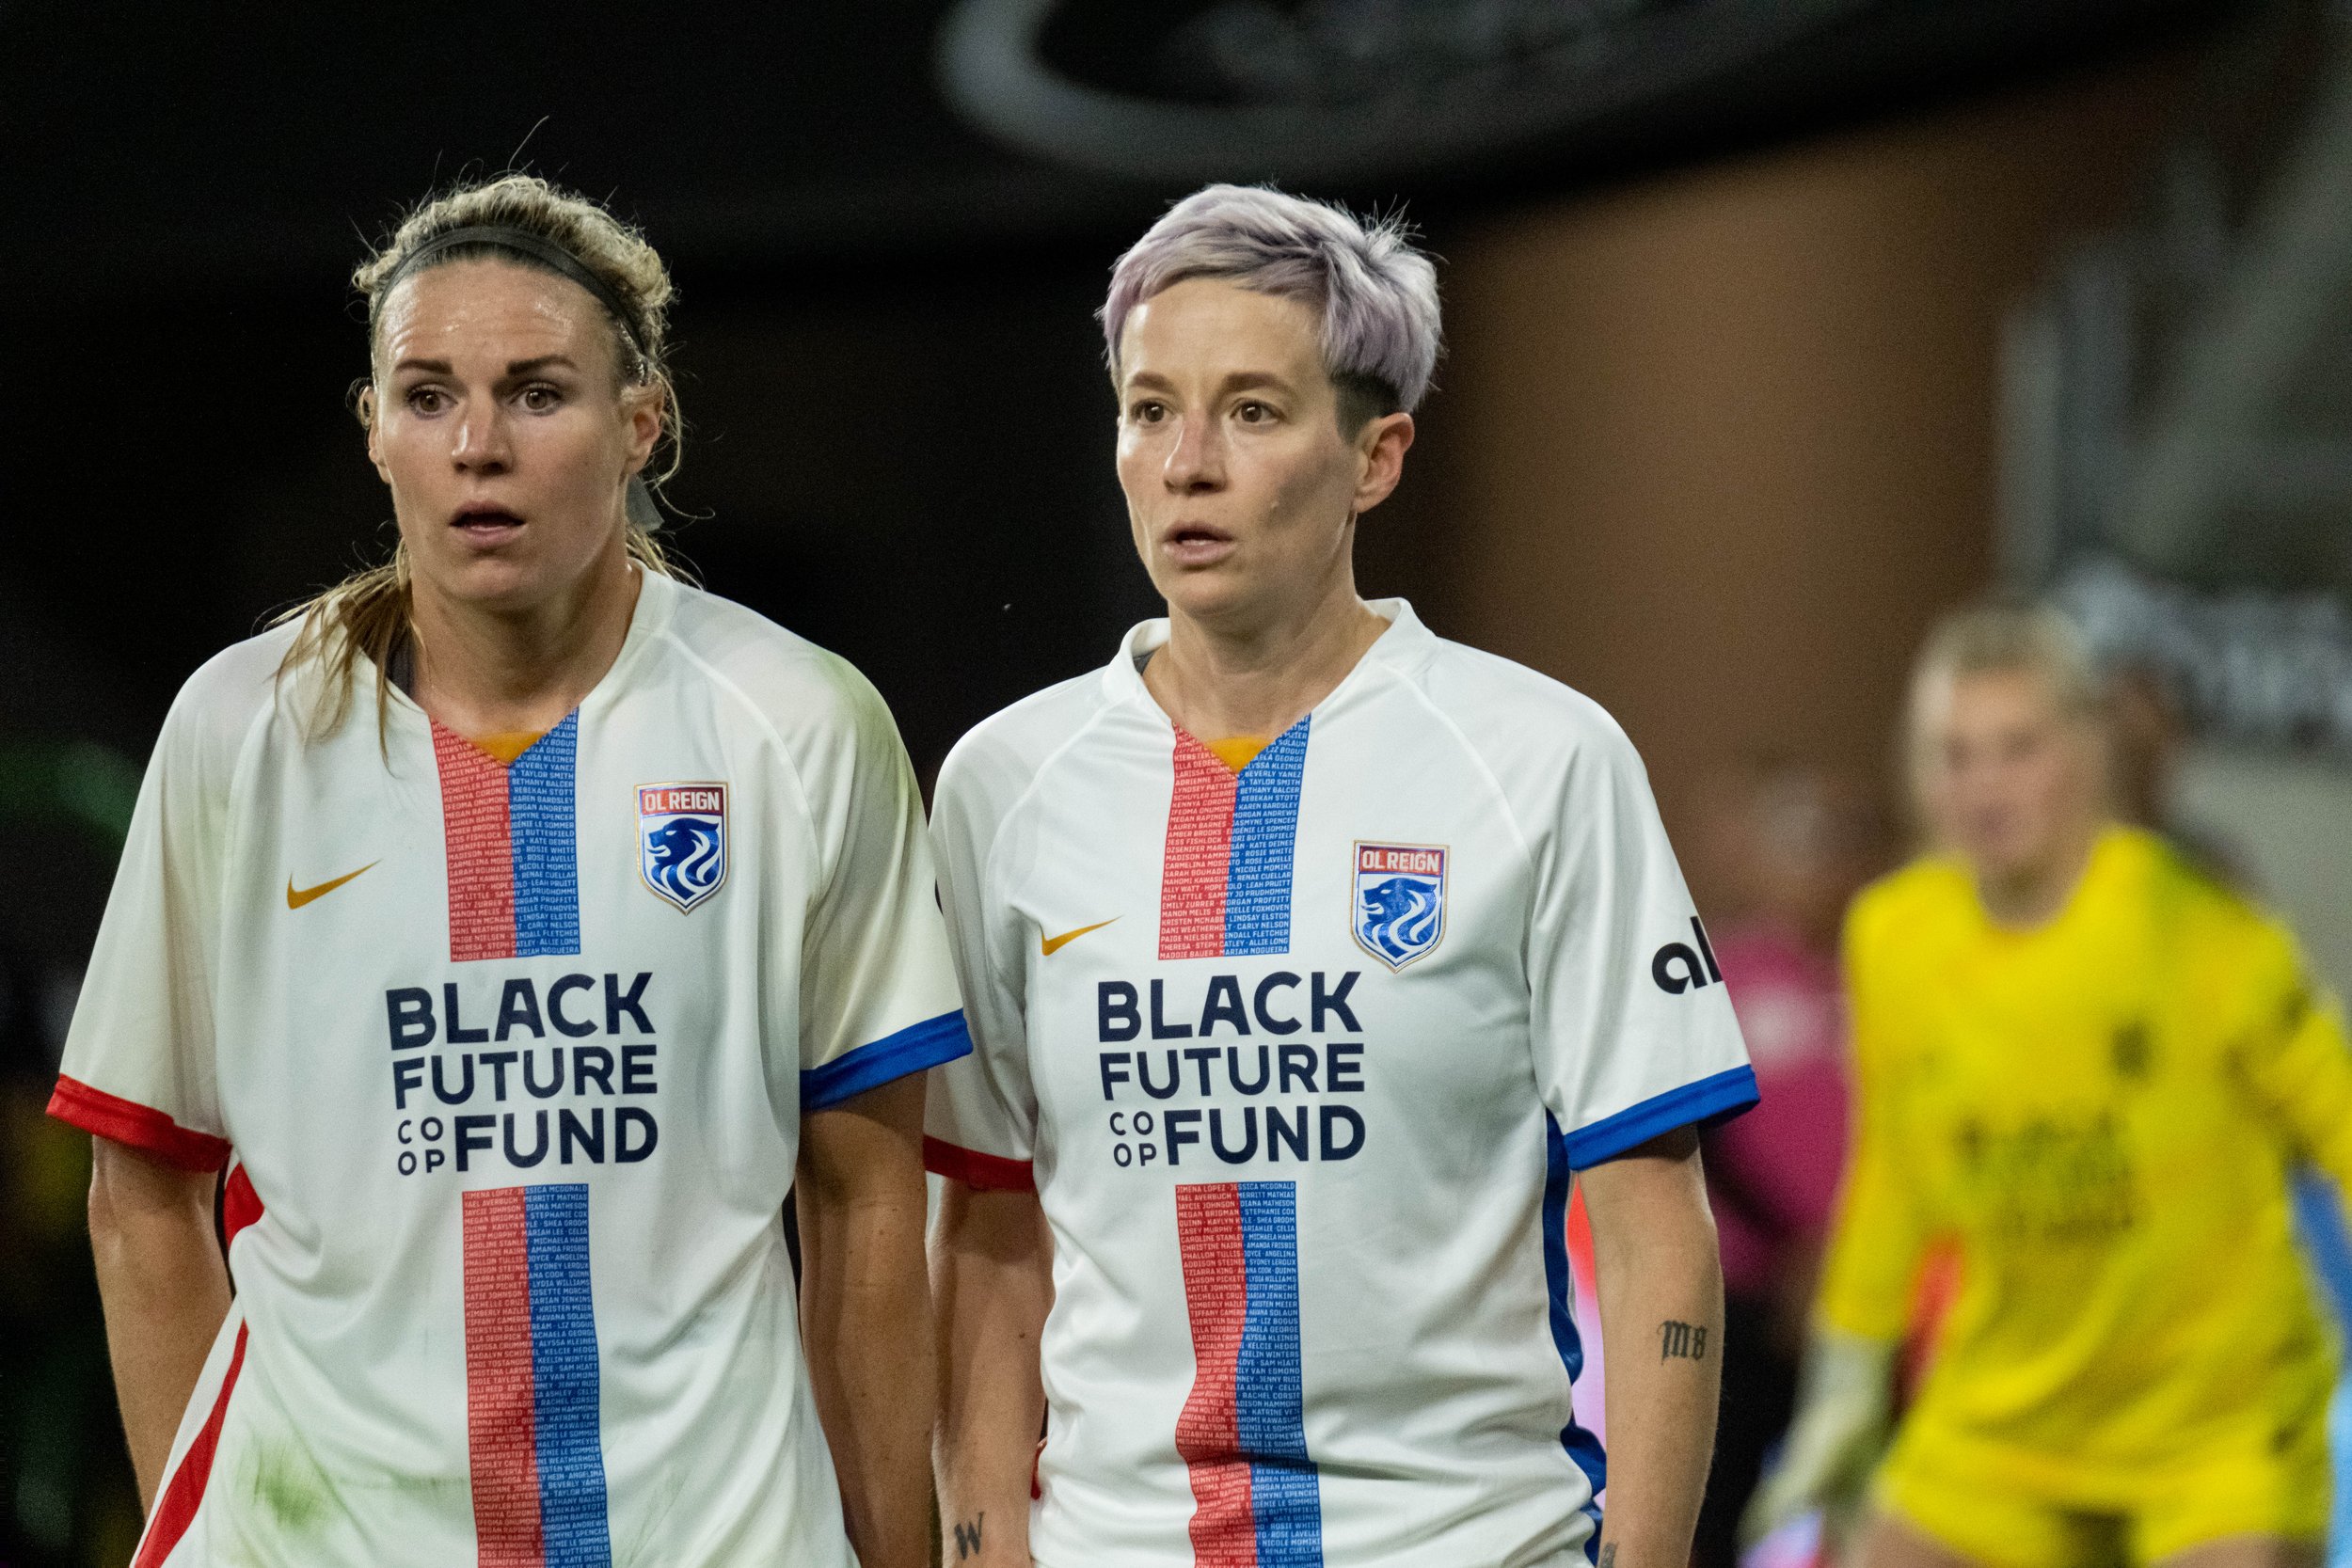  OL Reign forwards Veronica Latsko and Megan Rapinoe awaiting the free-kikc during their match against Angel City FC on Wednesday, April 19, 2023 in BMO Stadium at Los Angeles, Calif. (Danilo Perez | The Corsair) 